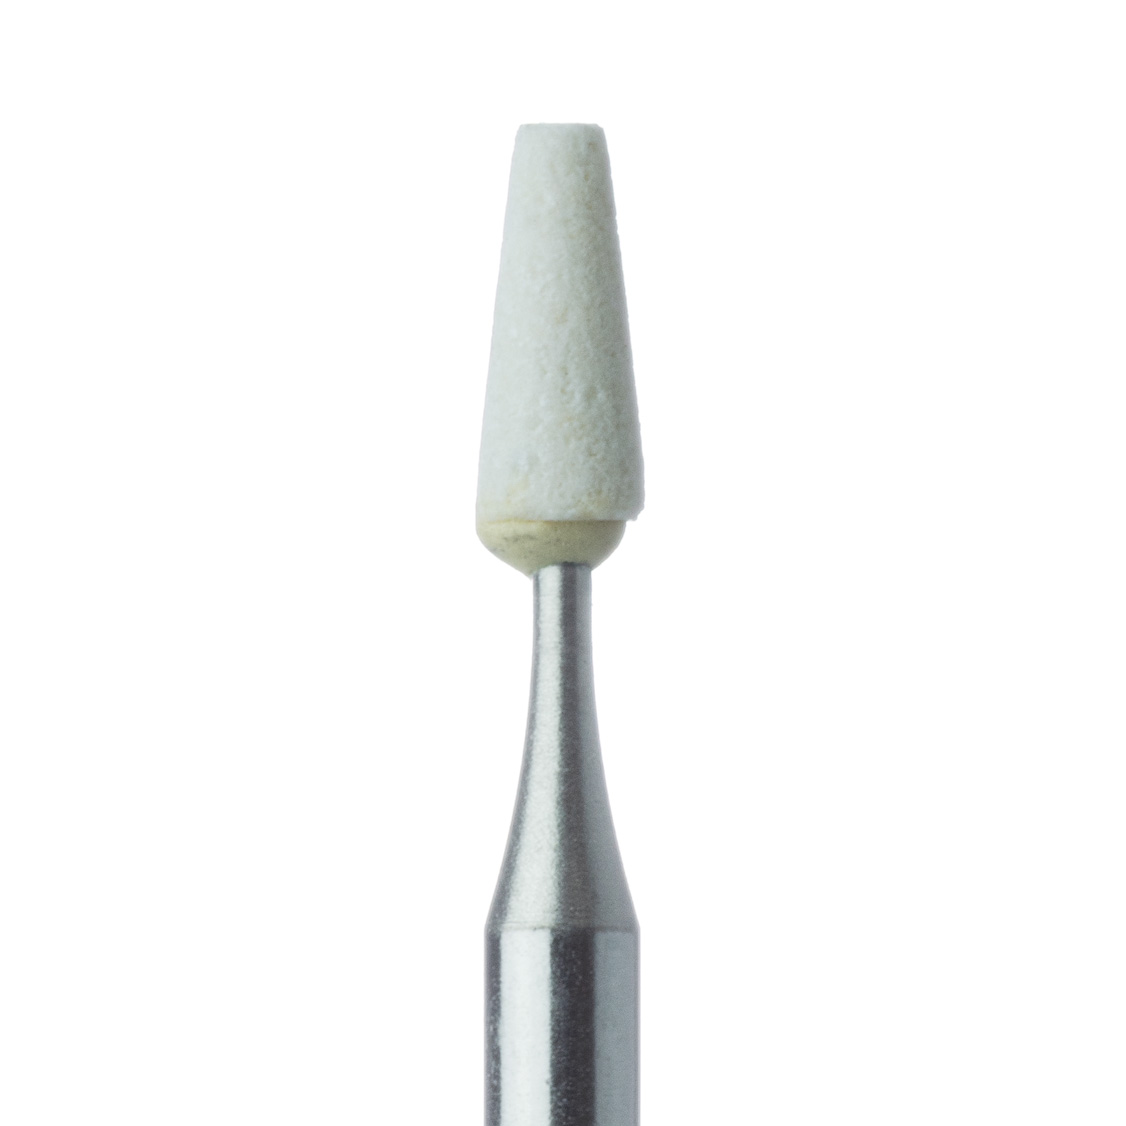 649XF-025-RA-WH Abrasive, White, Tapered Flat End, 2.5mm Ø, Extra Fine, RA